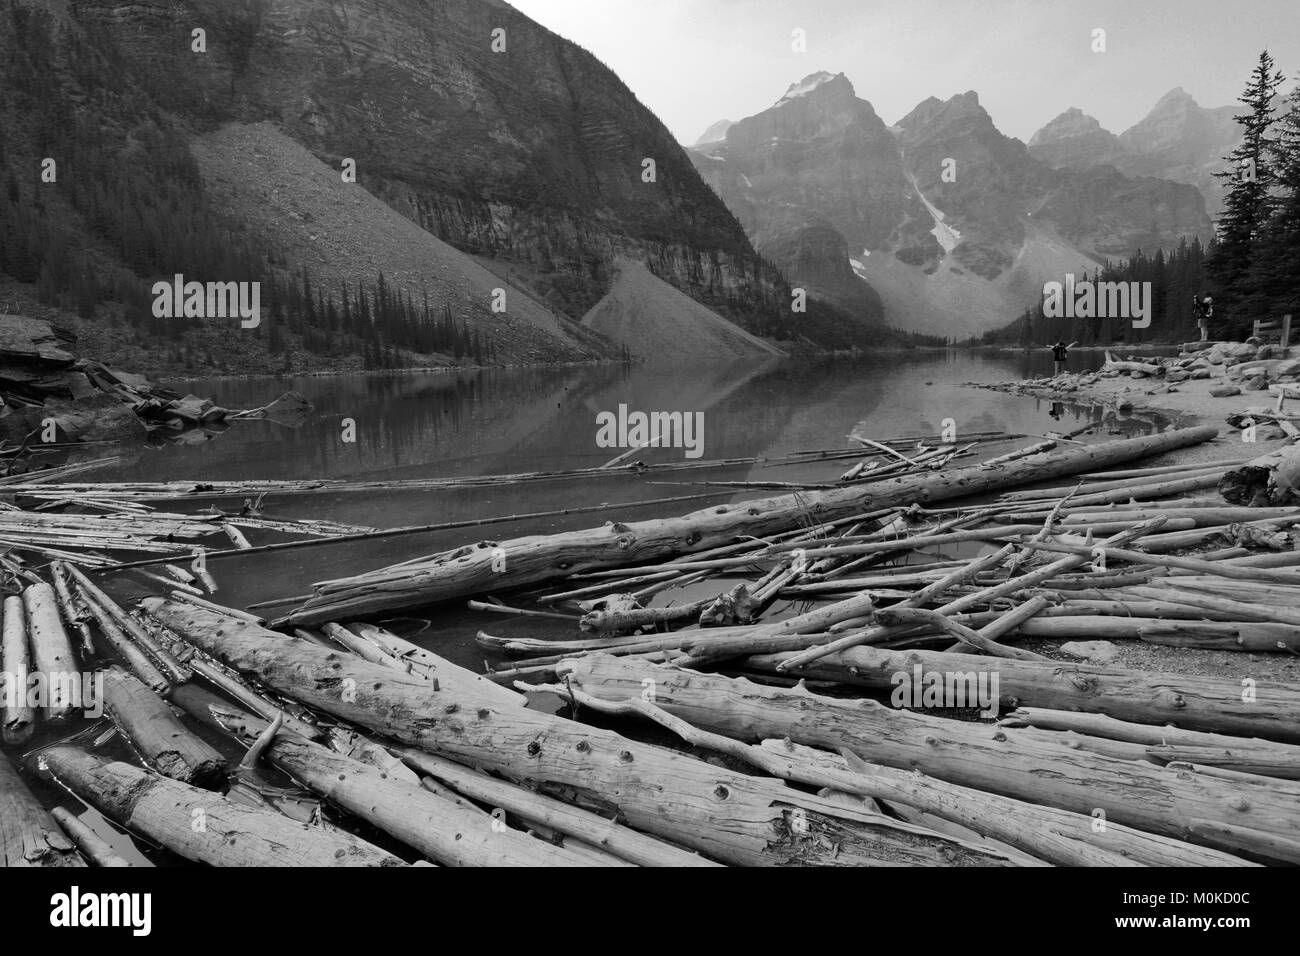 View over the glacial Lake Moraine, Banff national Park, UNESCO World Heritage Site, Rocky Mountains, Alberta, Canada. Stock Photo